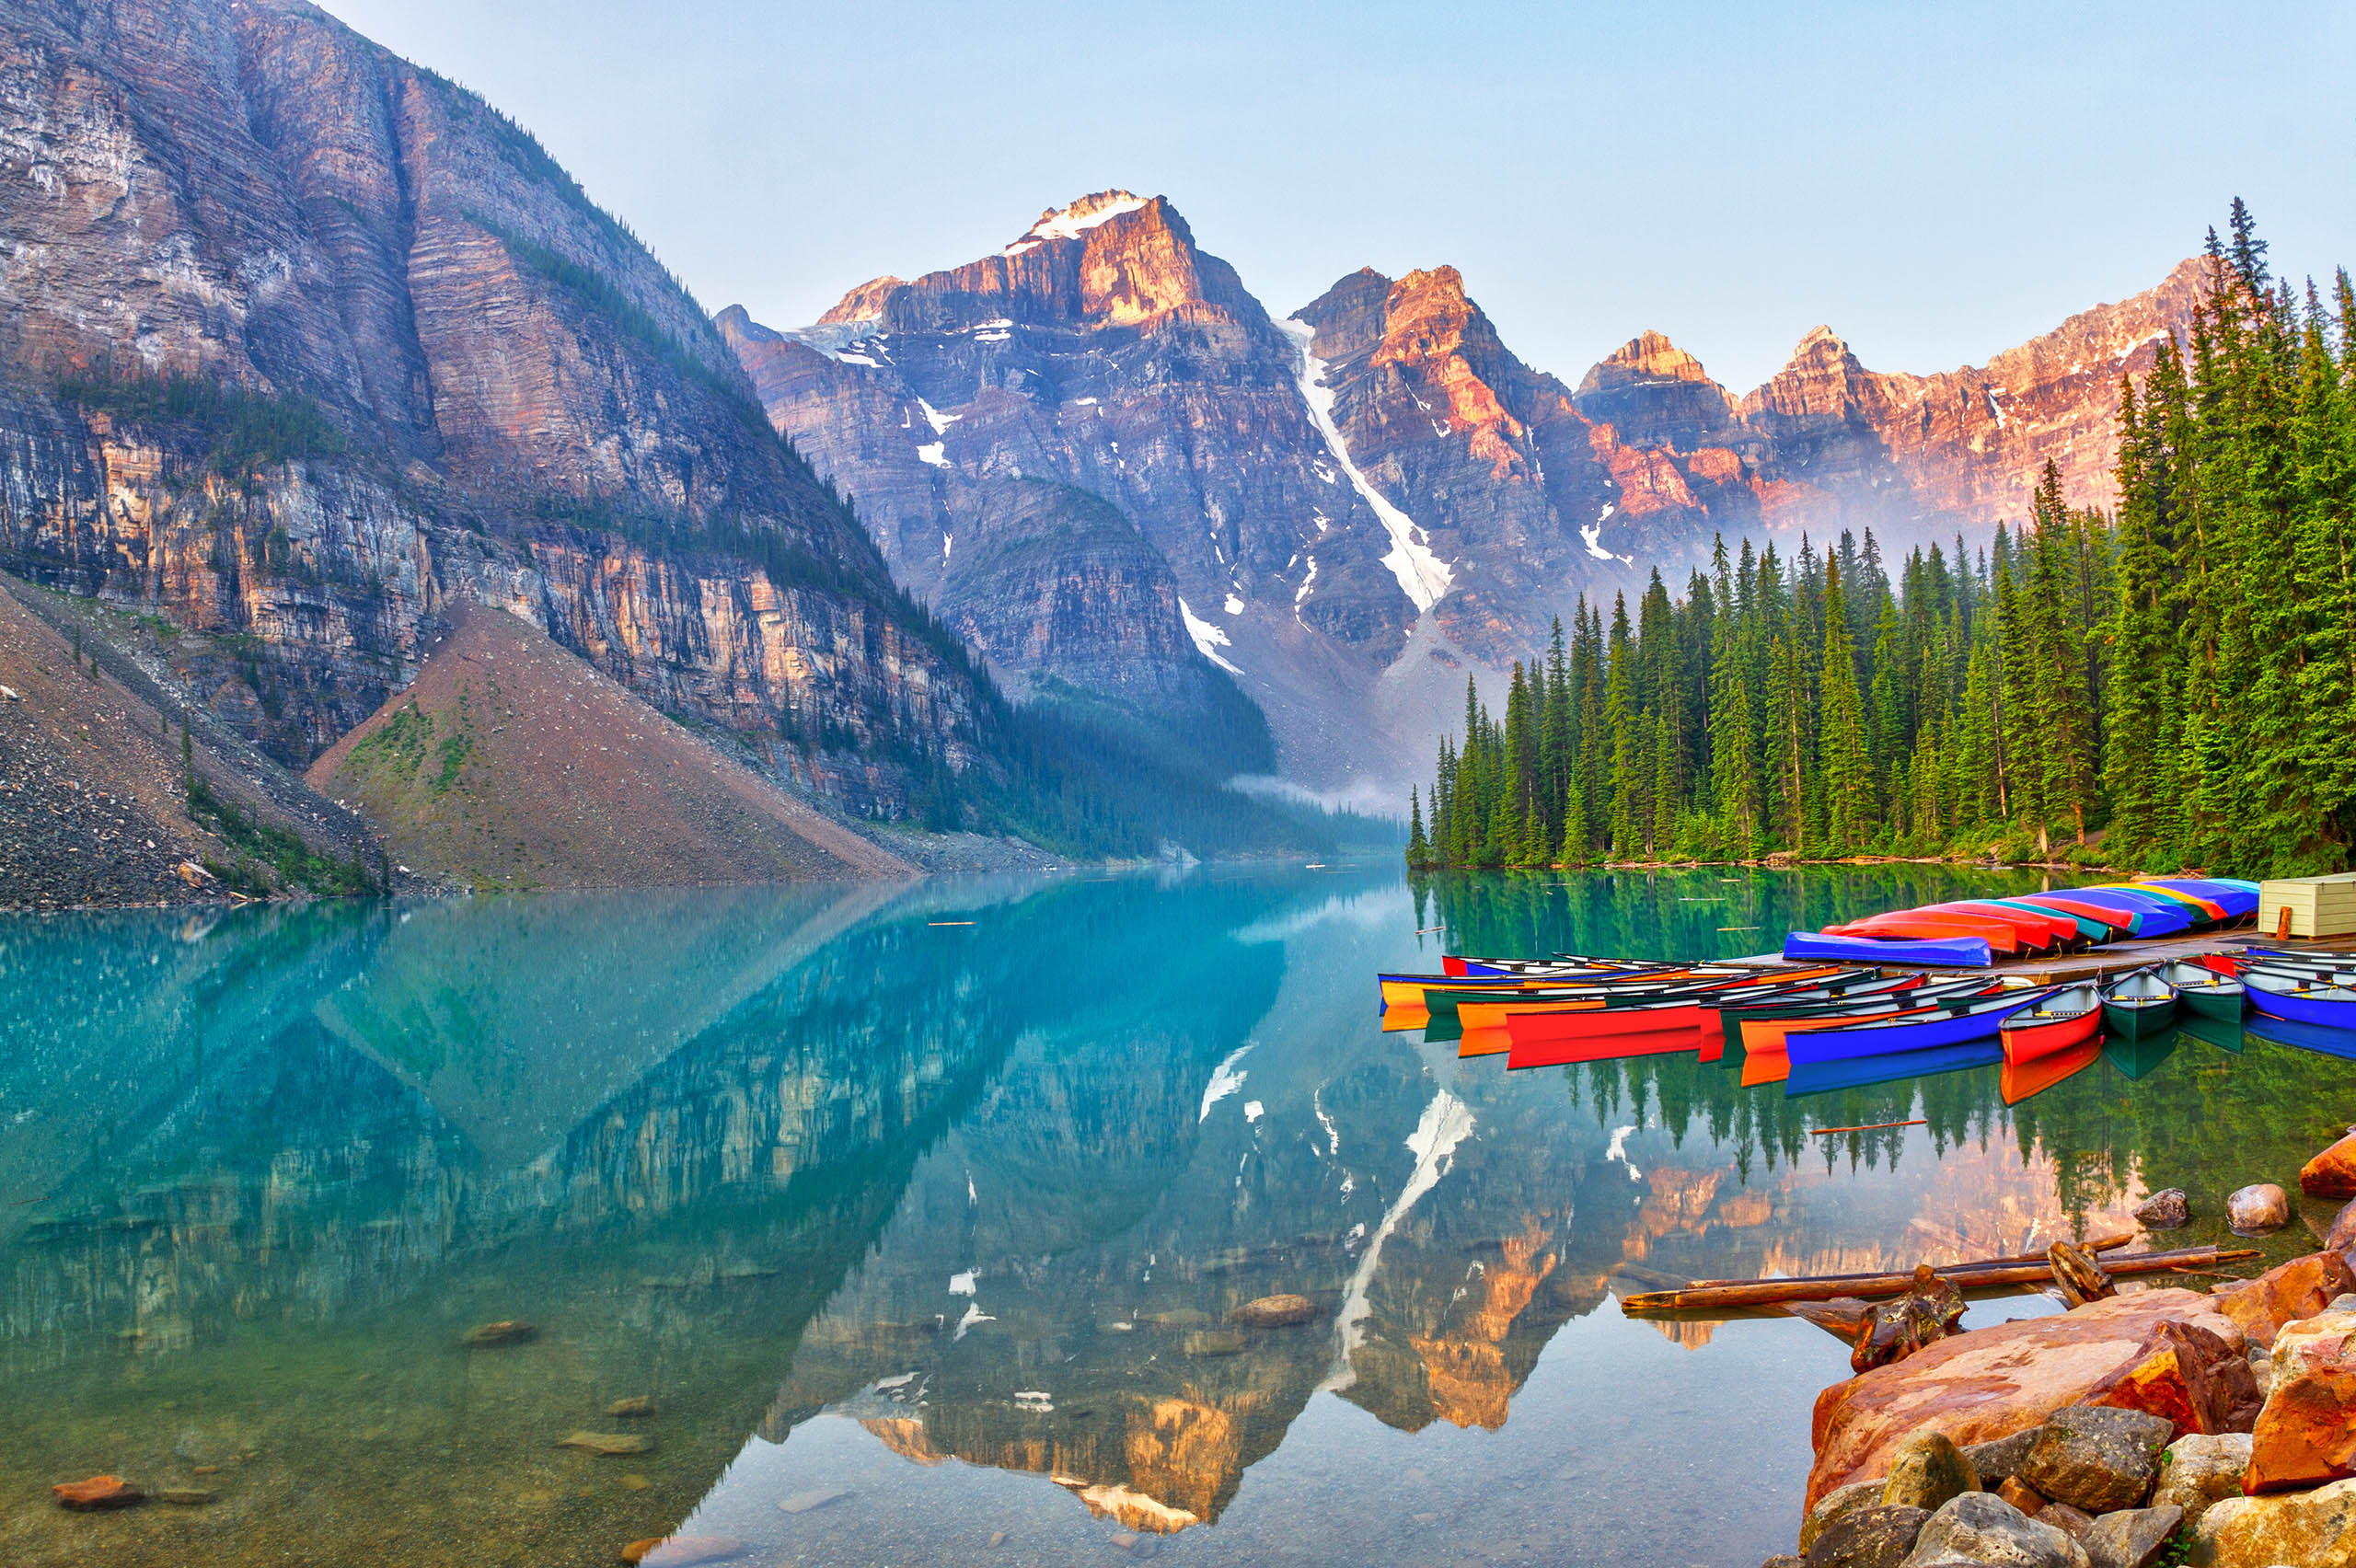 Sunrise over the Valley of the Ten Peaks with canoes on the glacier-fed, turquoise colored Moraine Lake in the Canadian Rockies.